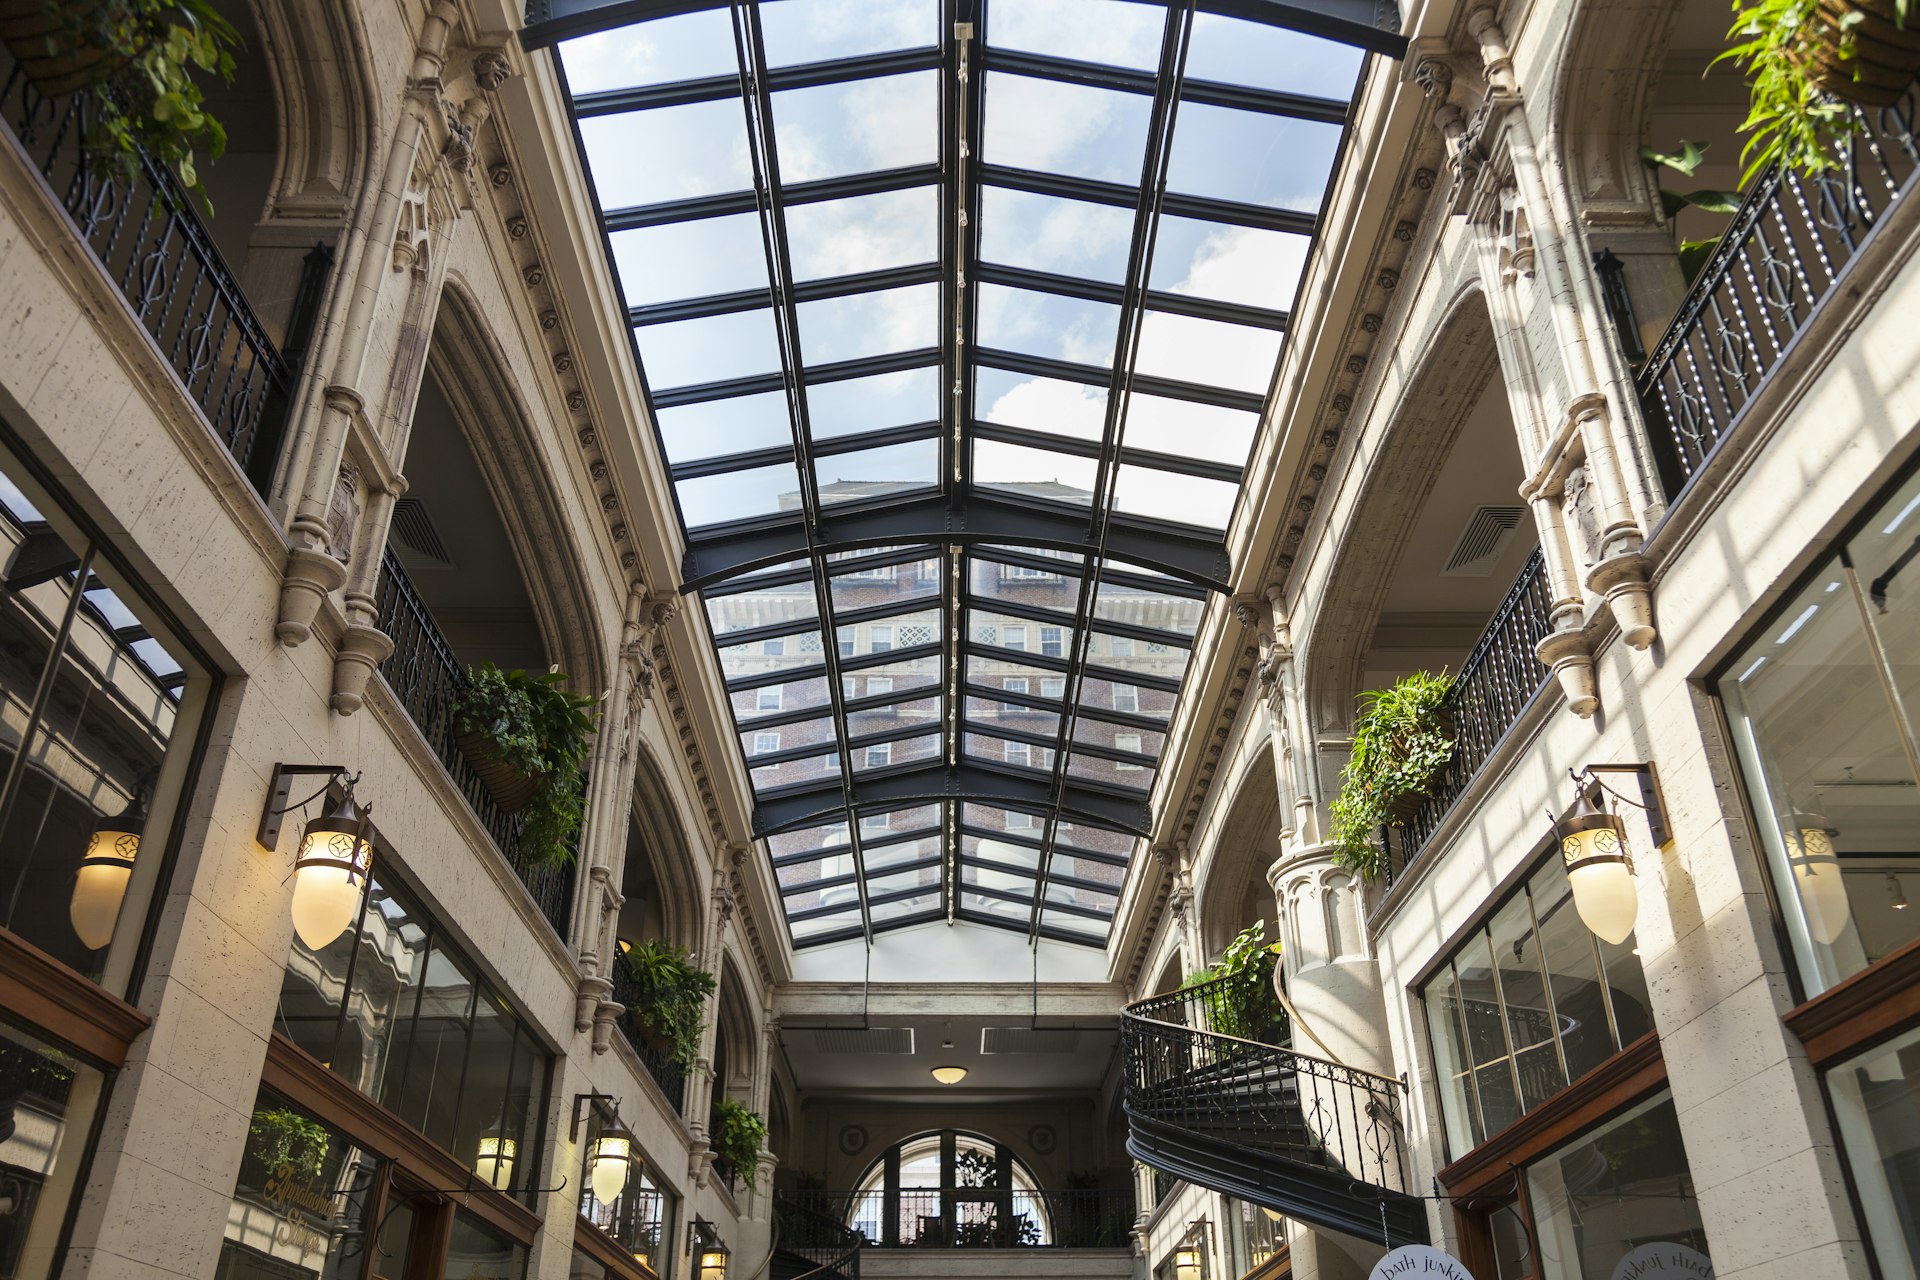 When you're ready to come in from the great outdoors, the area in and around Grove Arcade offers a variety of local shops © Juan Silva / Getty Images